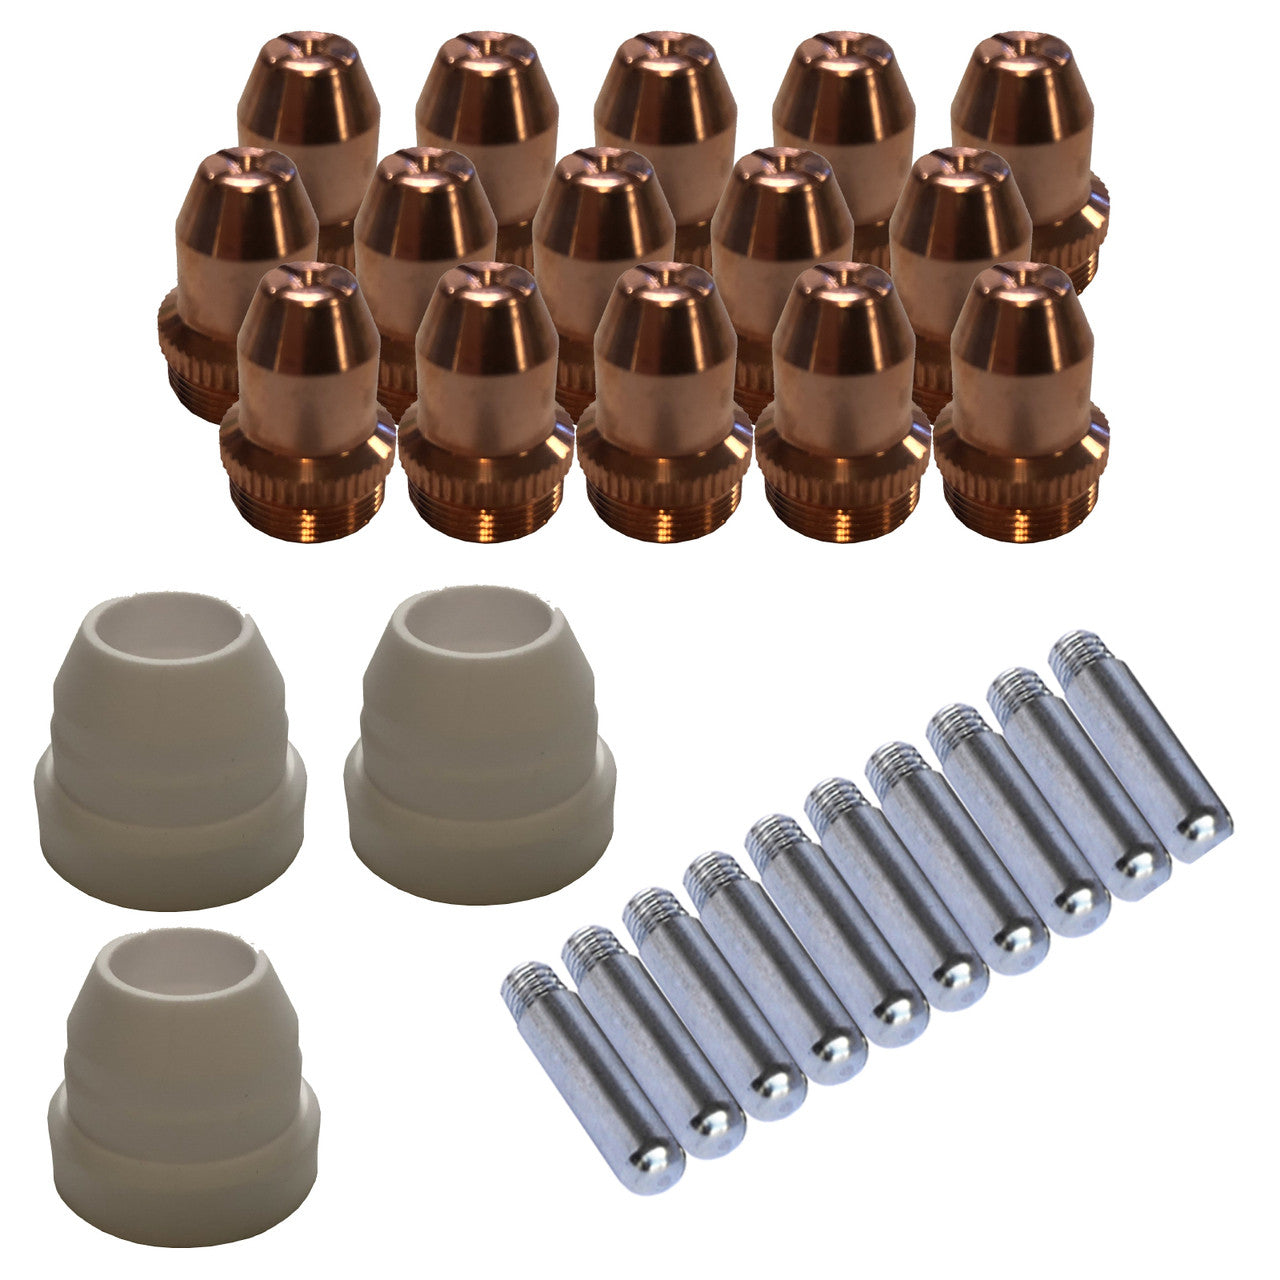 LOTOS LCS33 PLASMA CUTTER CONSUMABLES SETS FOR BROWN LT5000D AND BROWN CT520D (33) - LOTOS Plasma Cutters & Welders